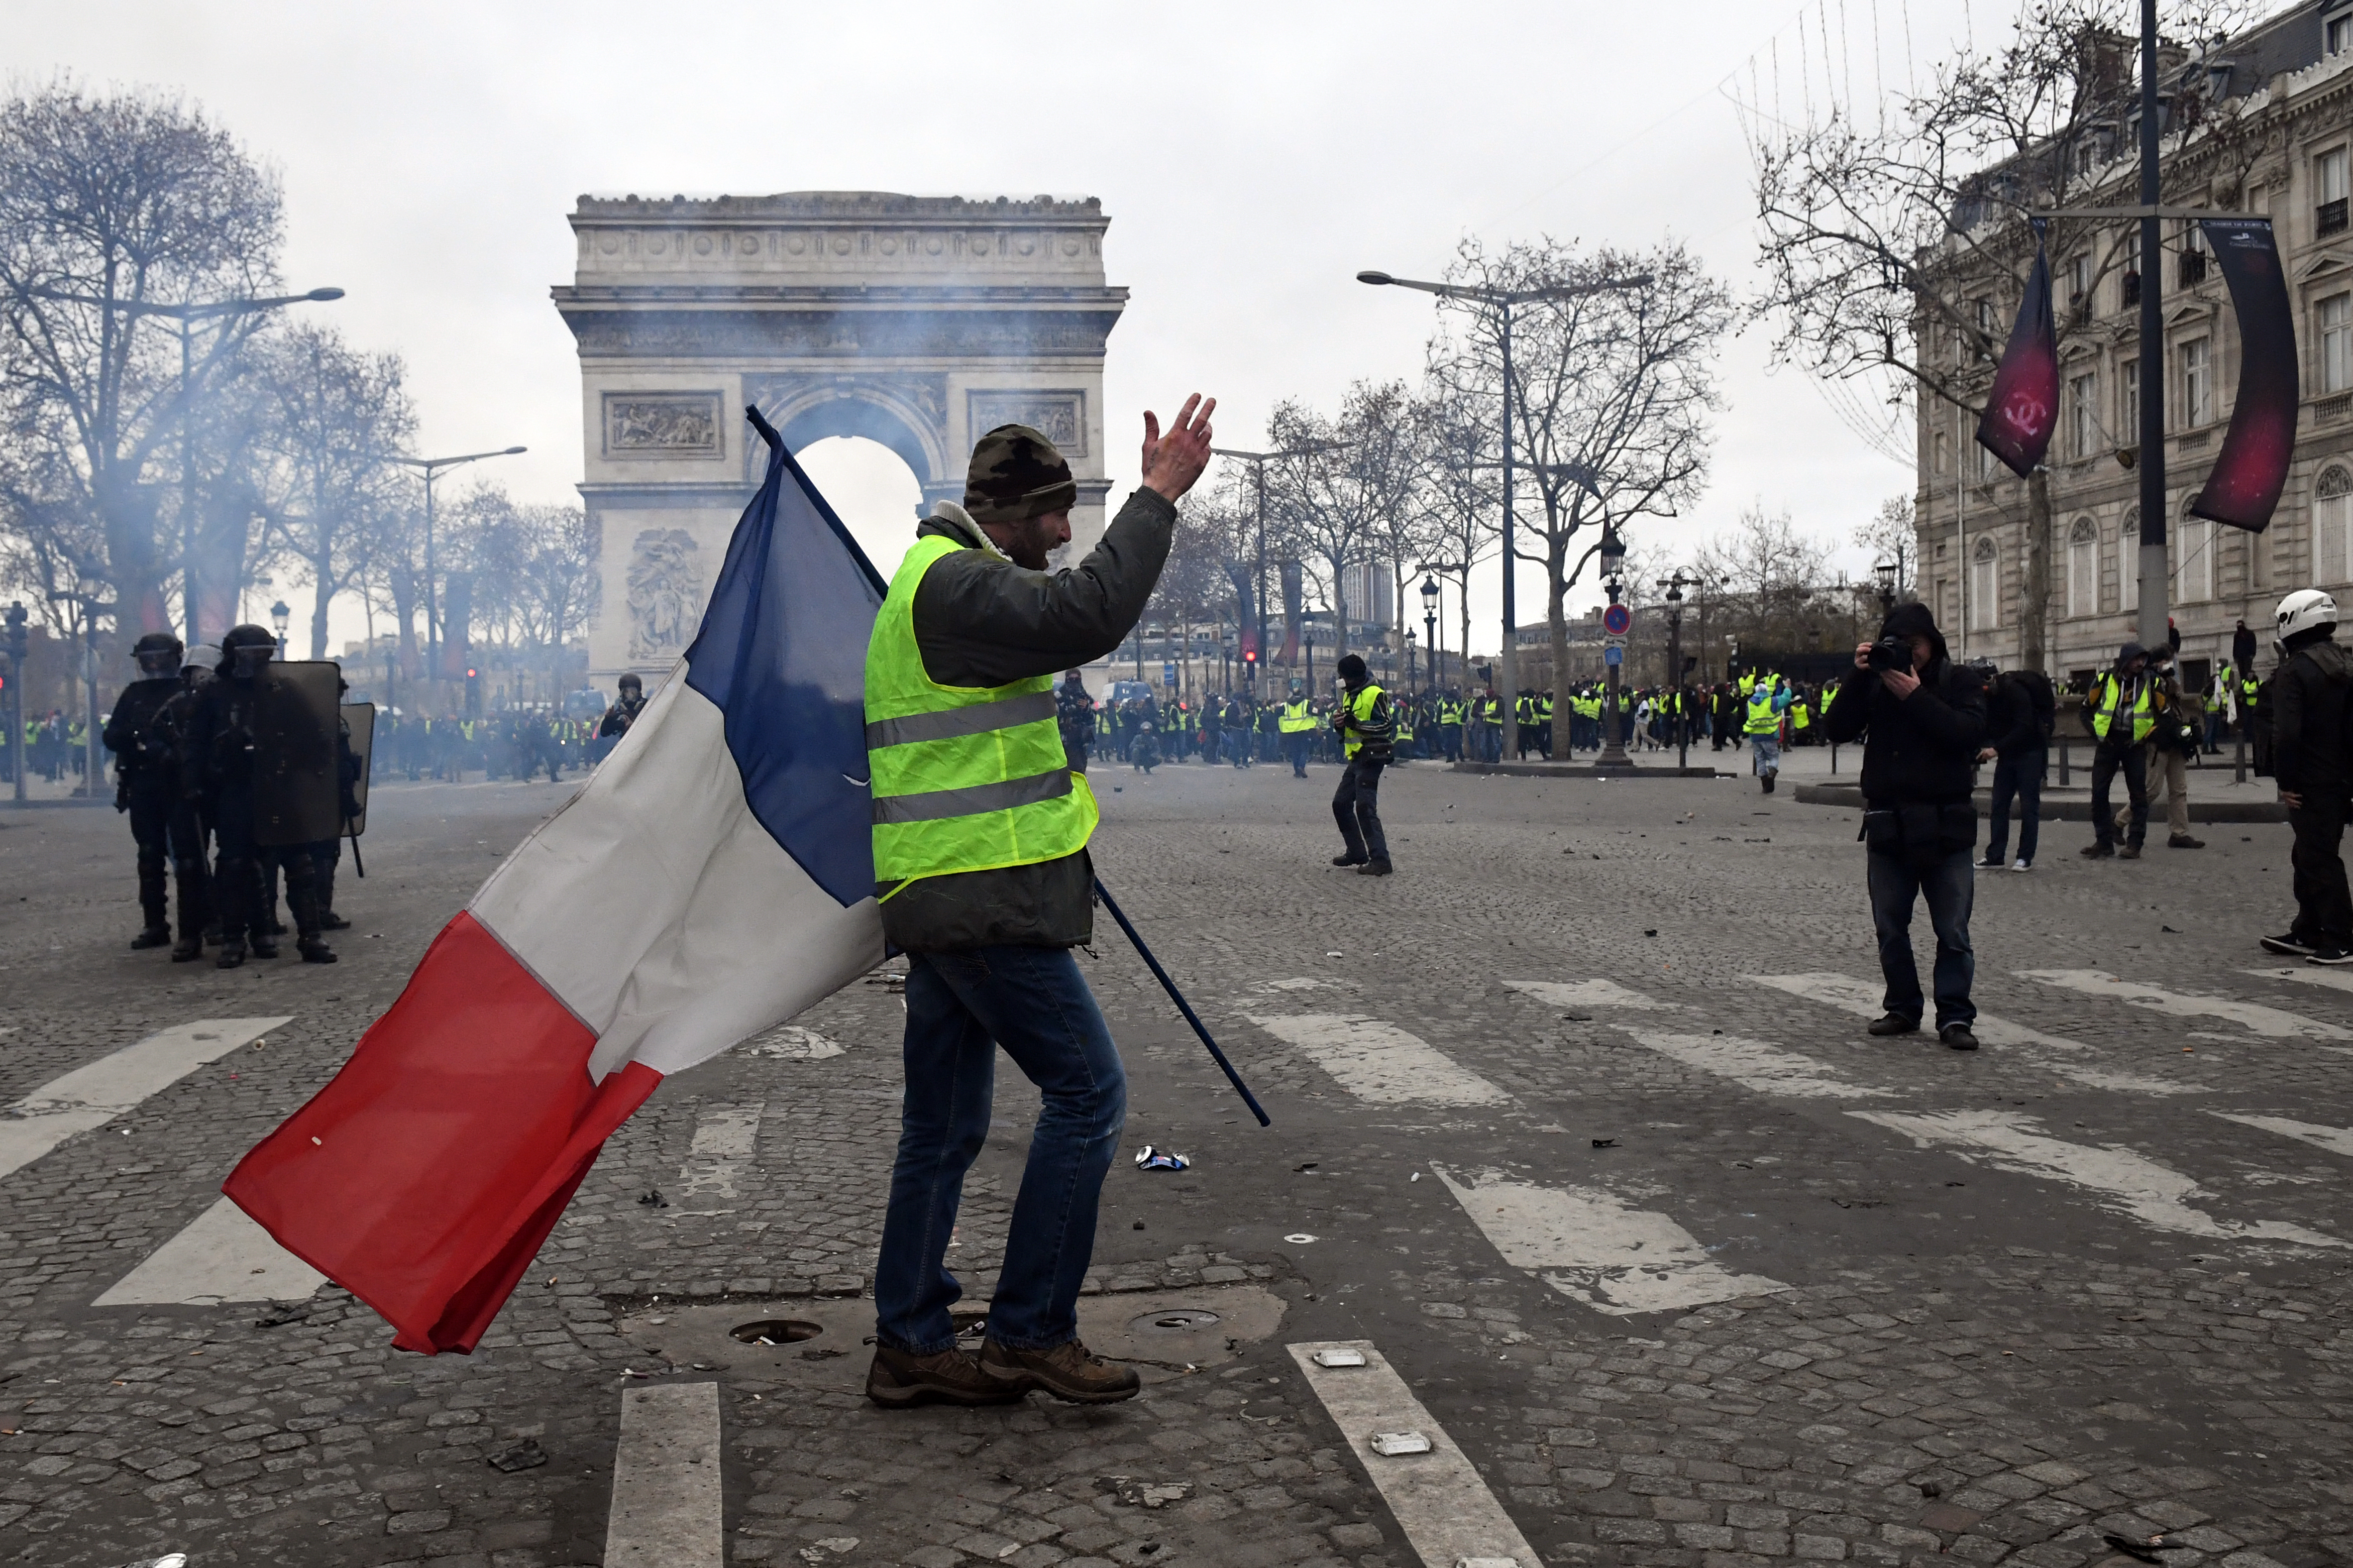 A protester walks walks with the french flag during the 'yellow vests' demonstration near the Arc de Triomphe on December 8, 2018 in Paris France. ''Yellow Vests' ("Gilet Jaunes" or "Vestes Jaunes") is a protest movement without political affiliation which was inspired by opposition to a new fuel tax. (Photo by Jeff J Mitchell/Getty Images)